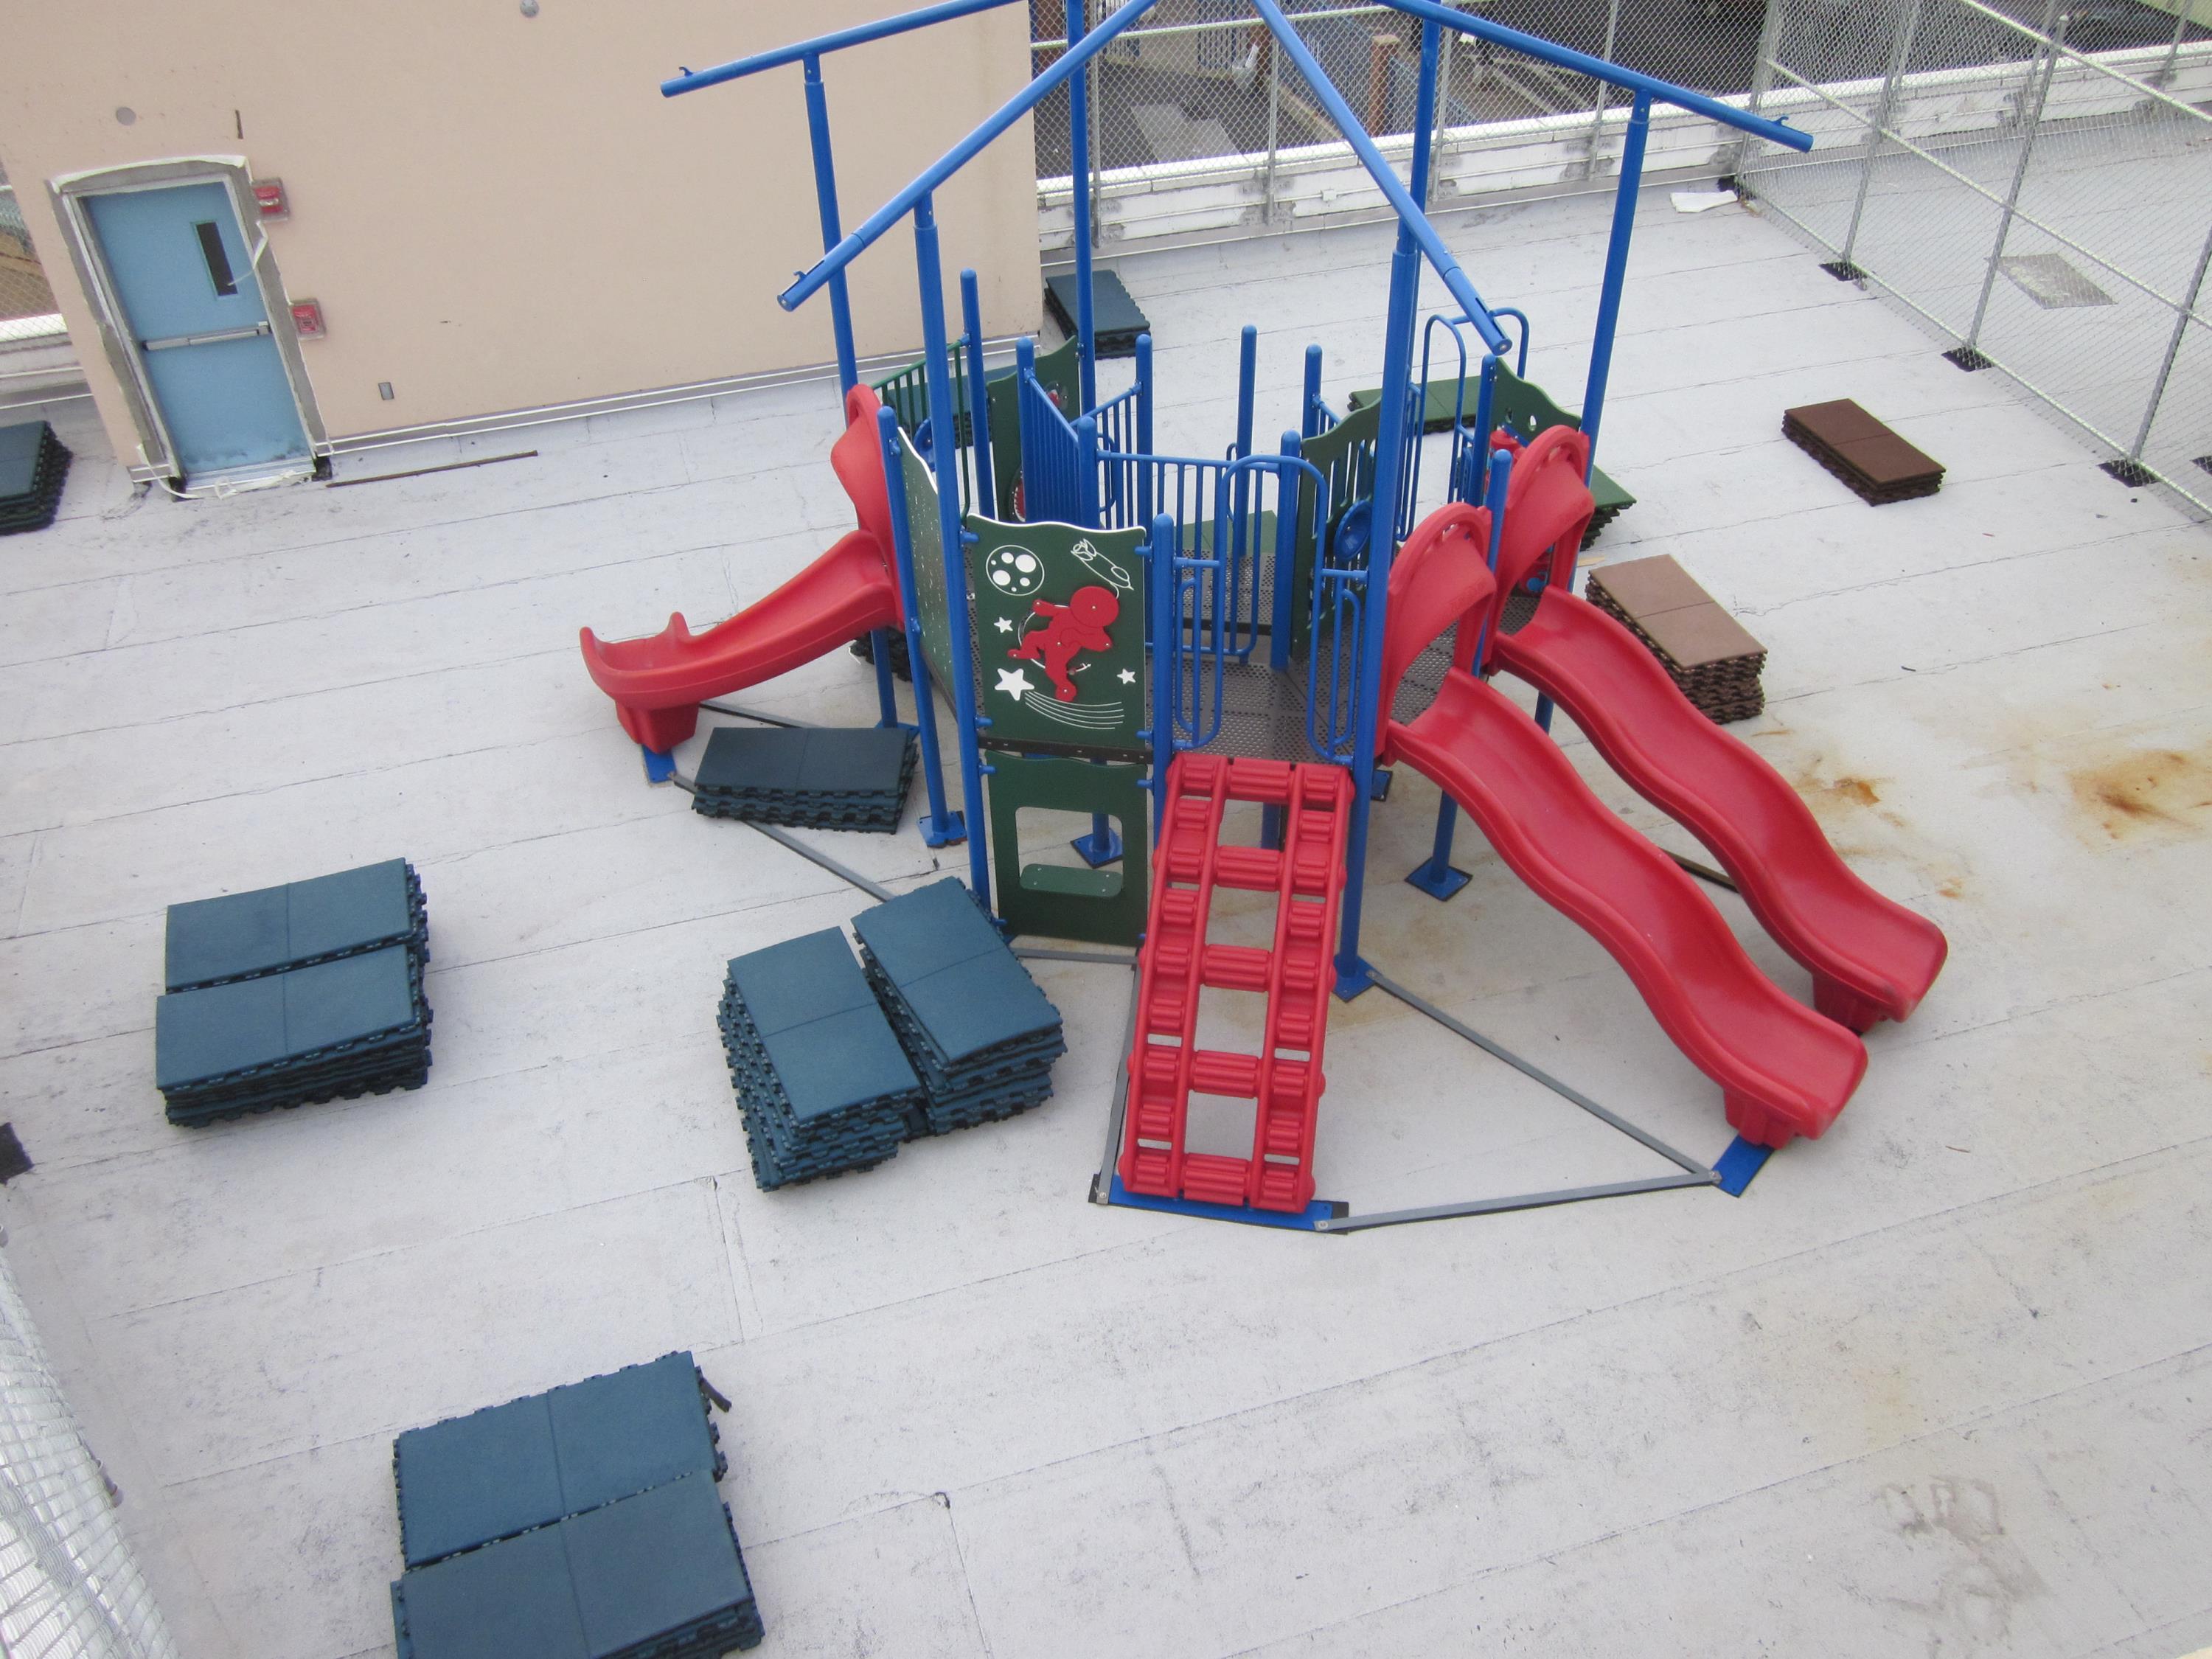 Rooftop Playground With Equipment for 2-5 e